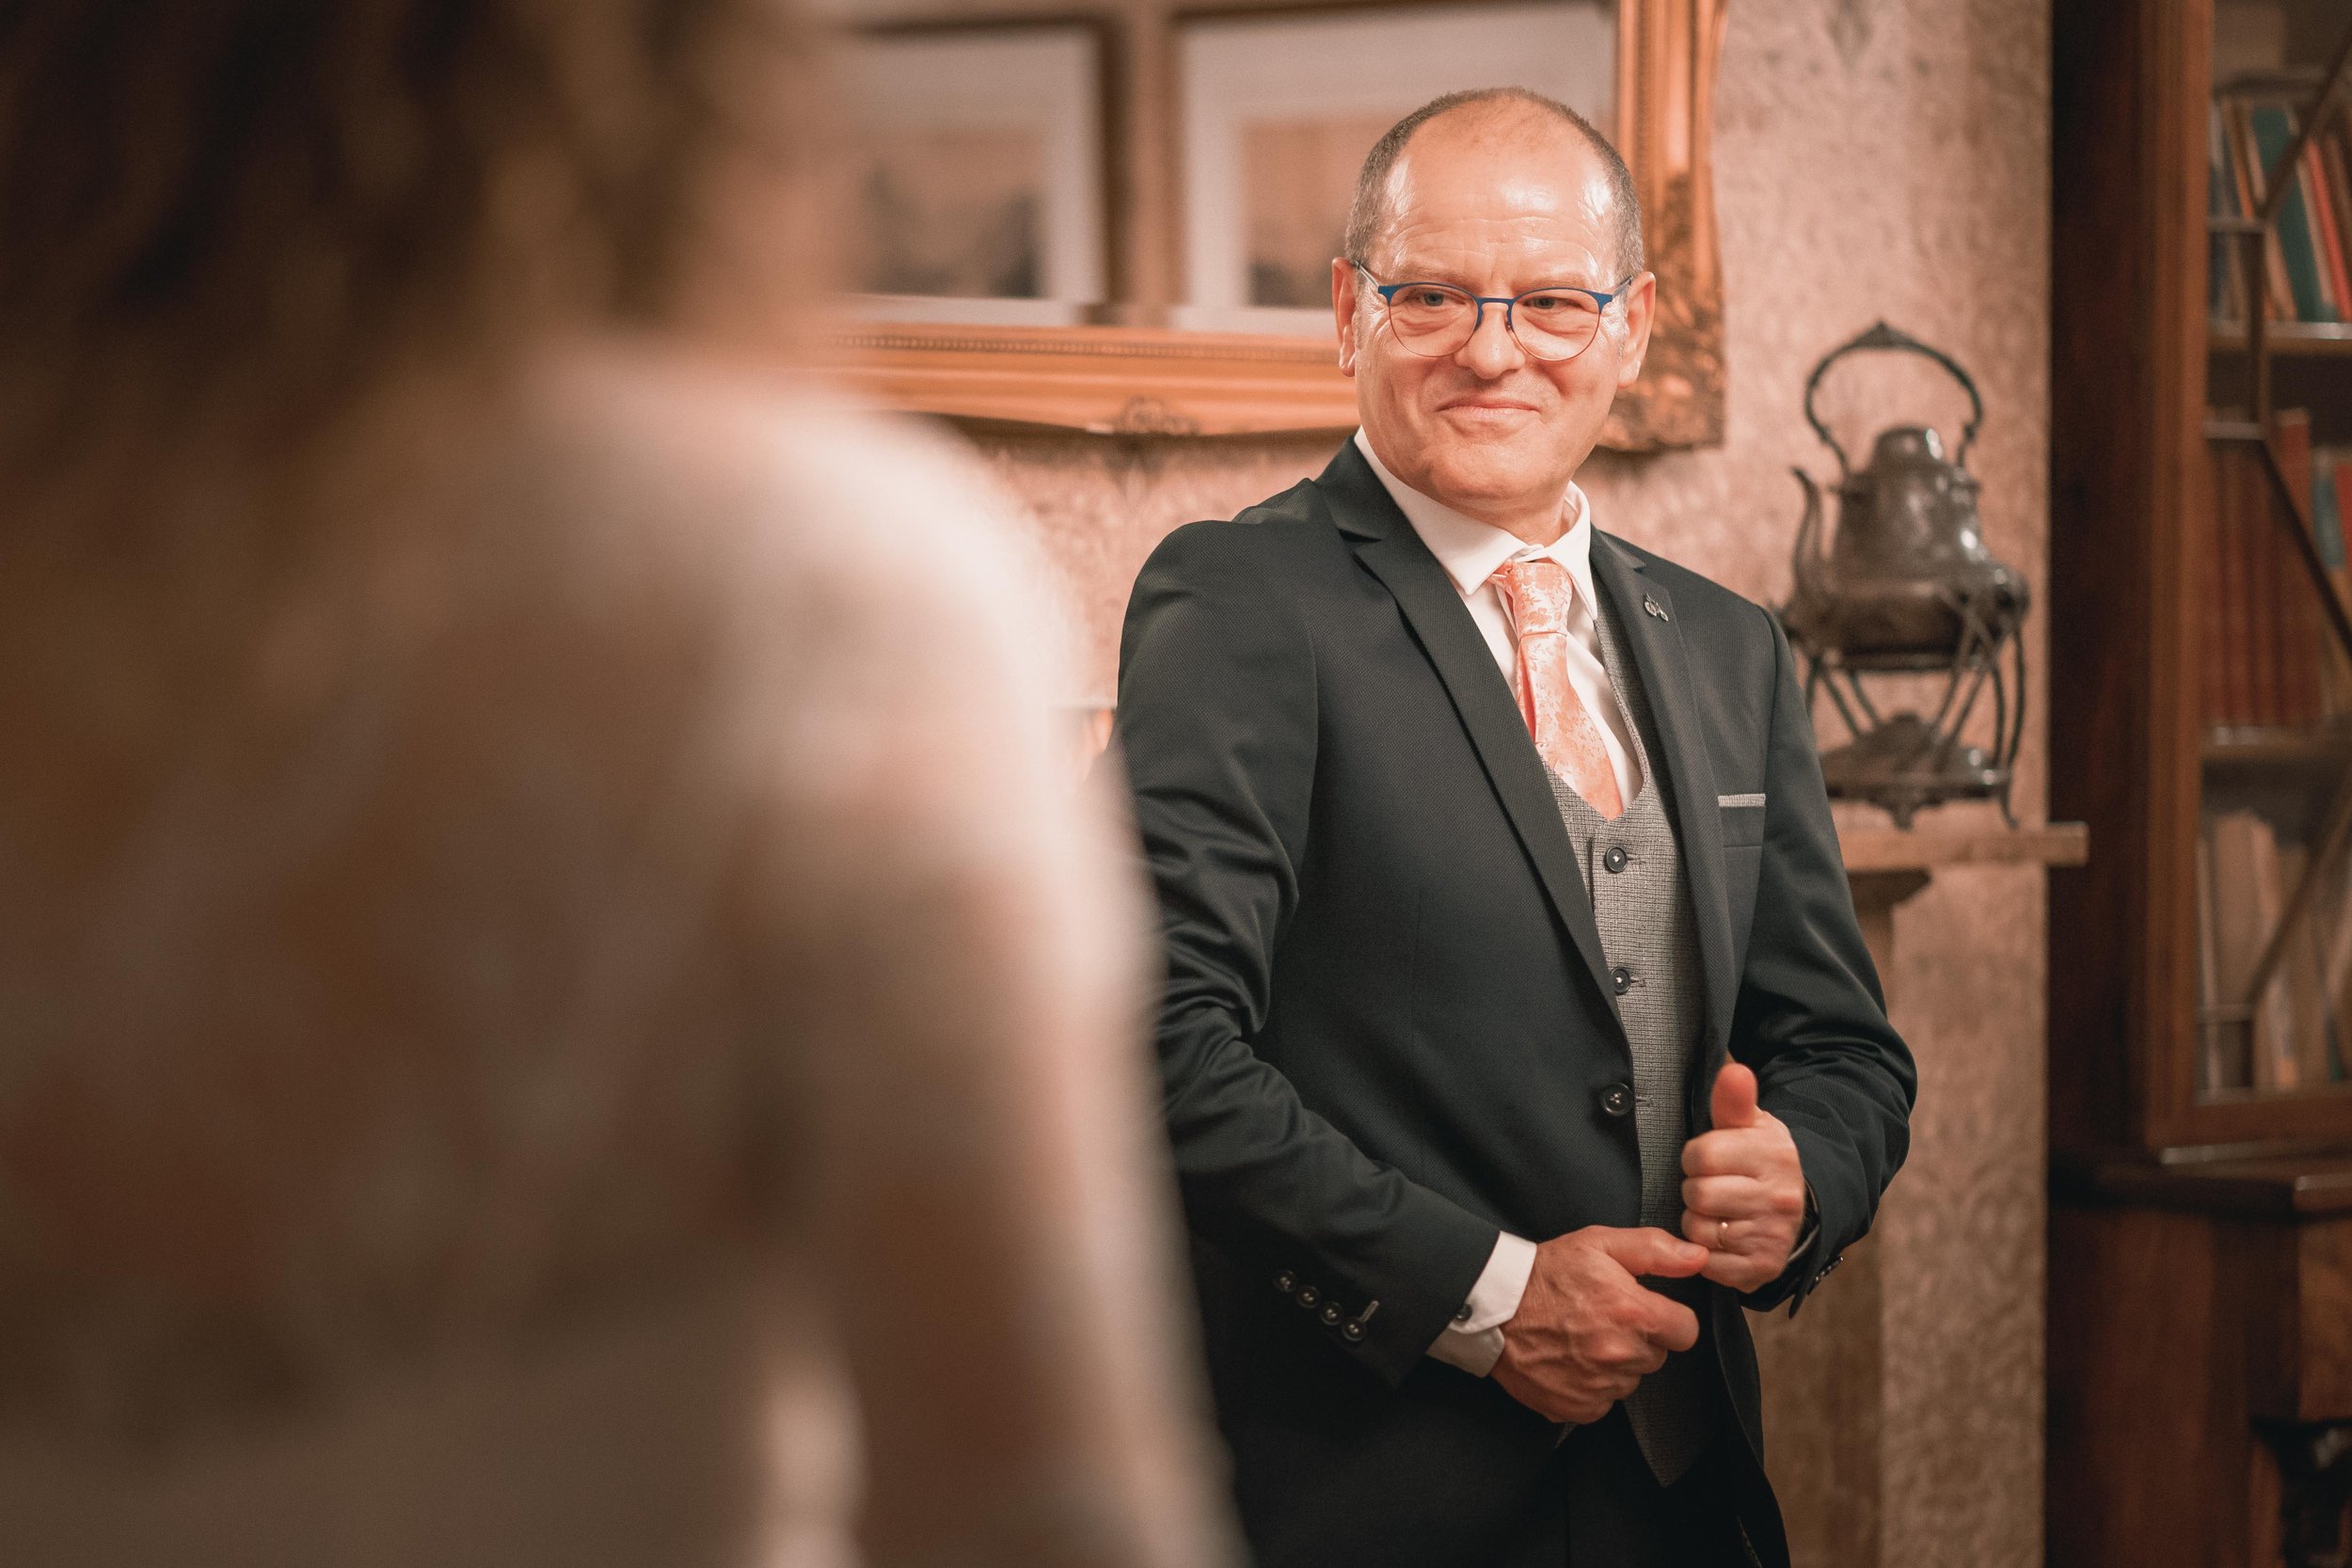 Christopher_James_Photography_Bride_&_groom_outdoor_wedding_under_Ghan_house_farther_of_the_bride_newry_wedding_photography.jpg